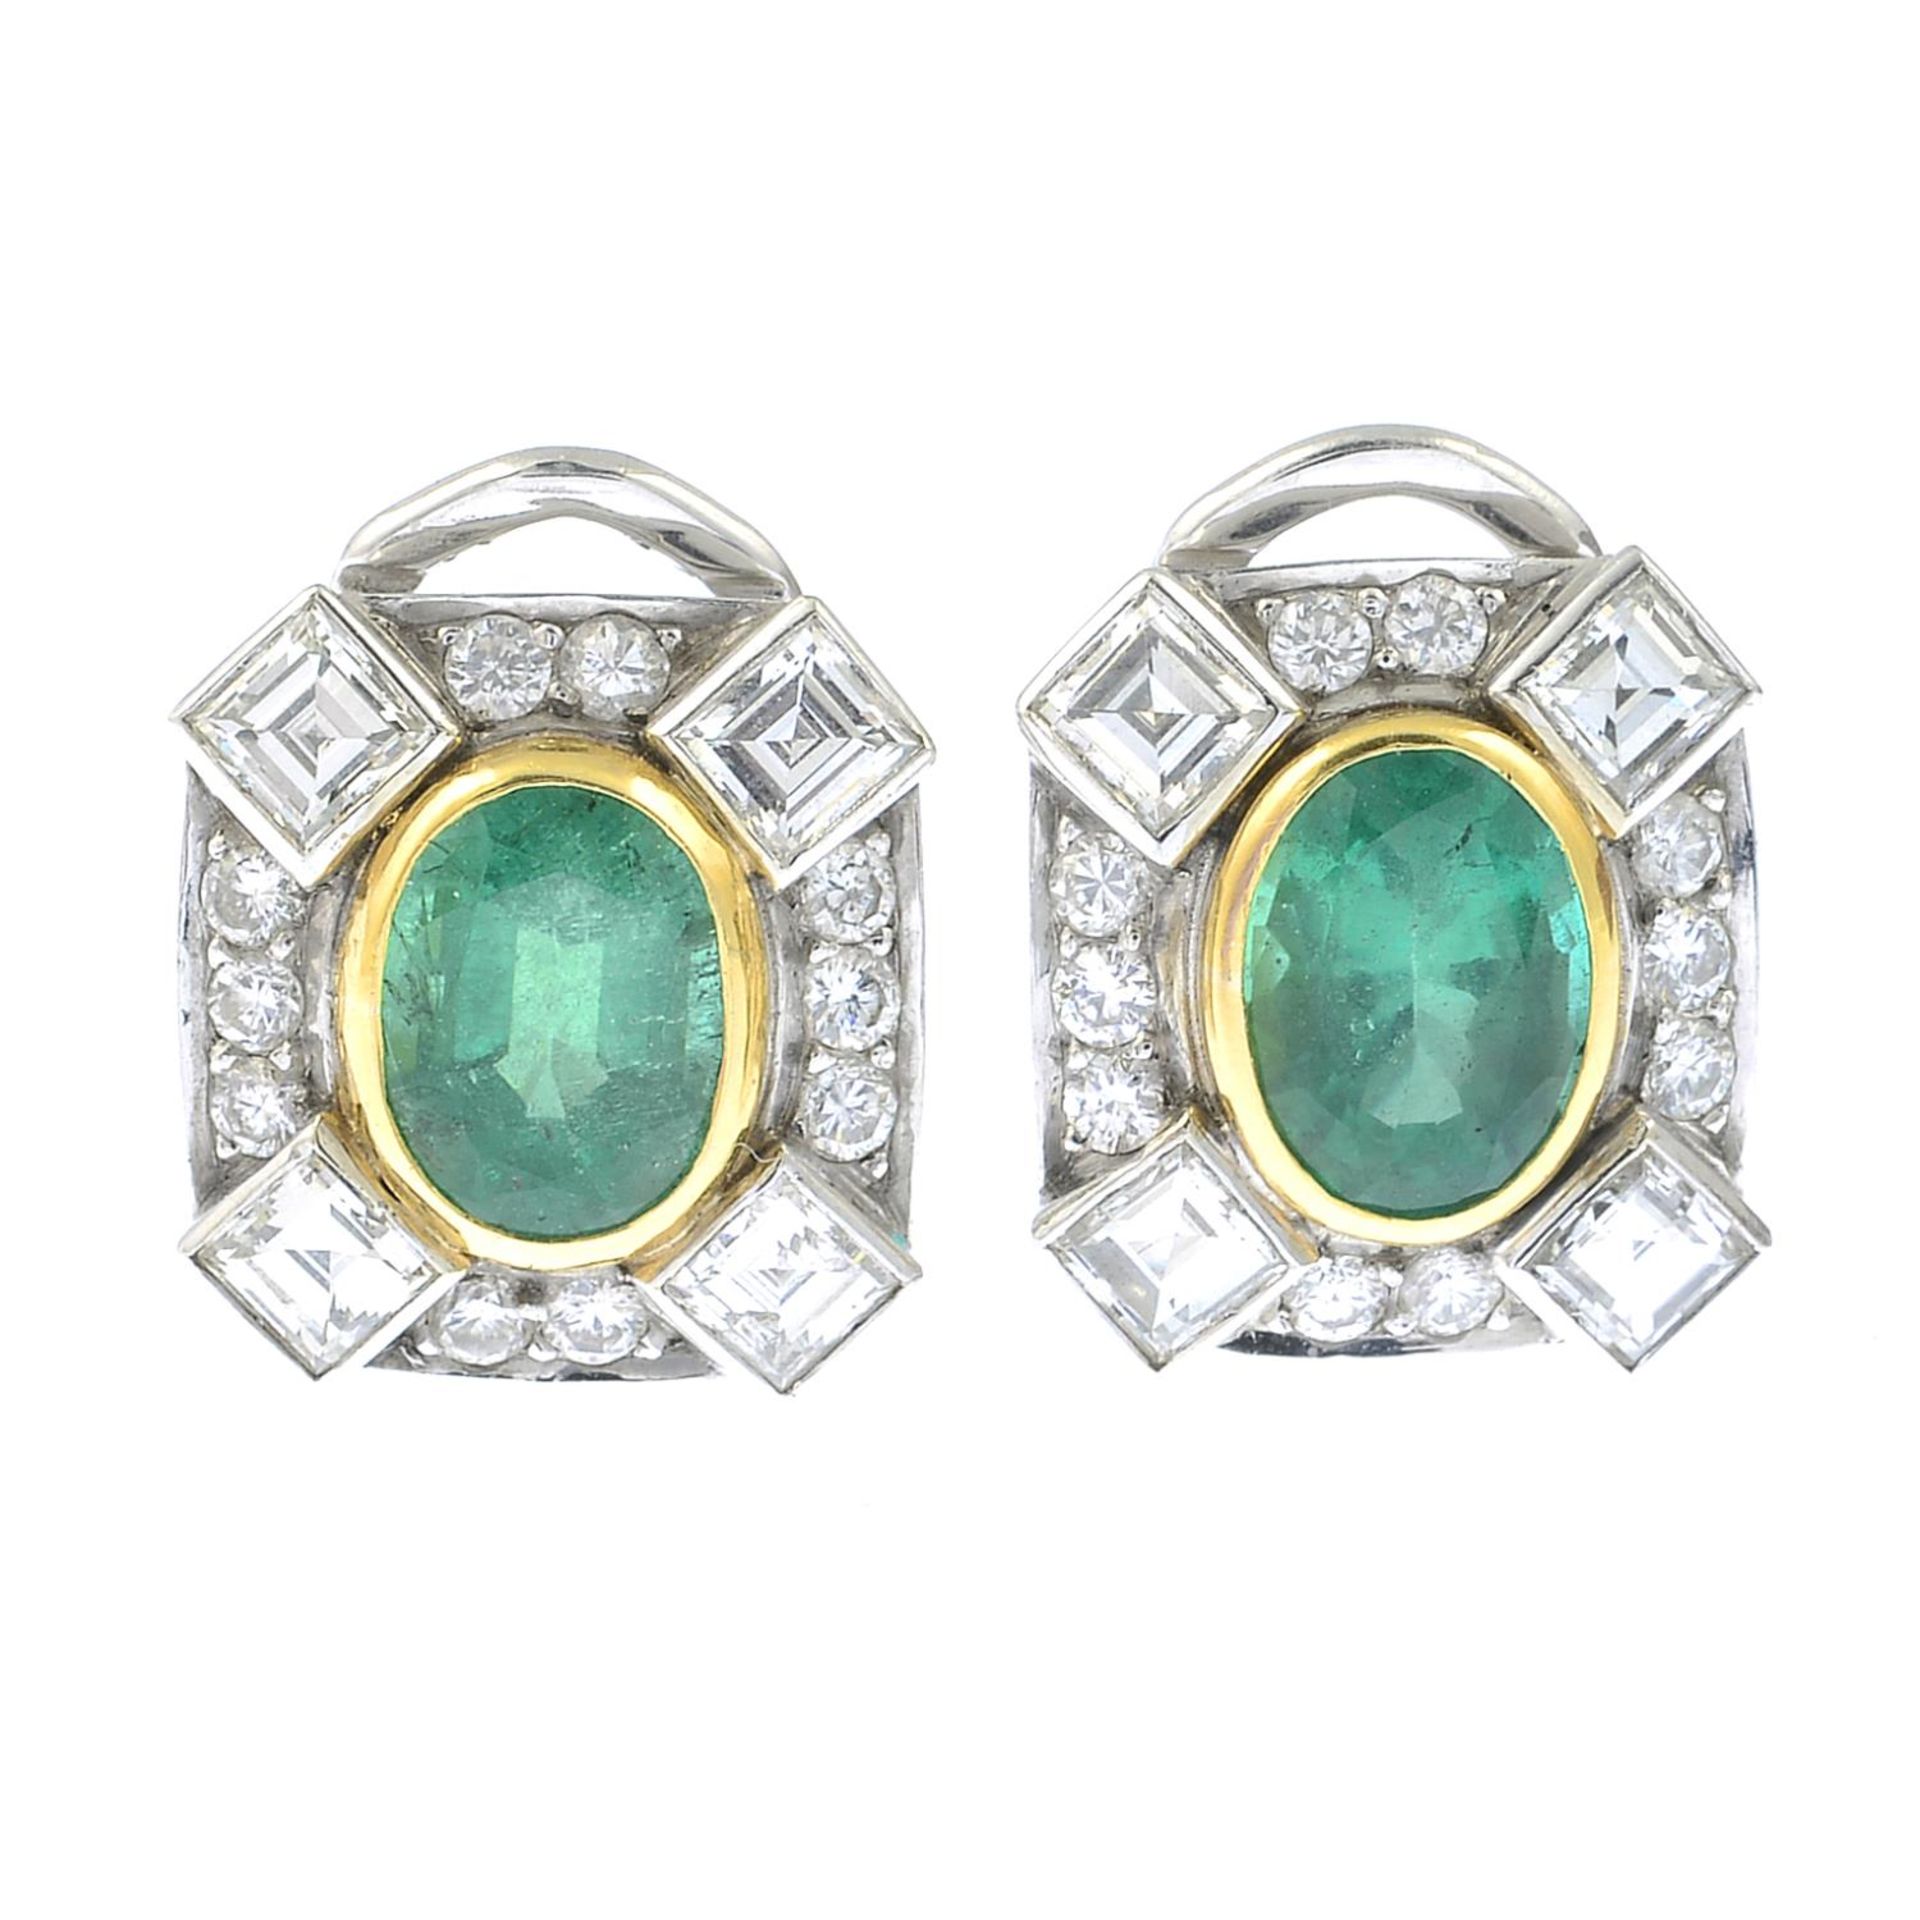 A pair of oval-shape emerald and vari-cut diamond earrings.Emerald calculated weights 0.92ct and